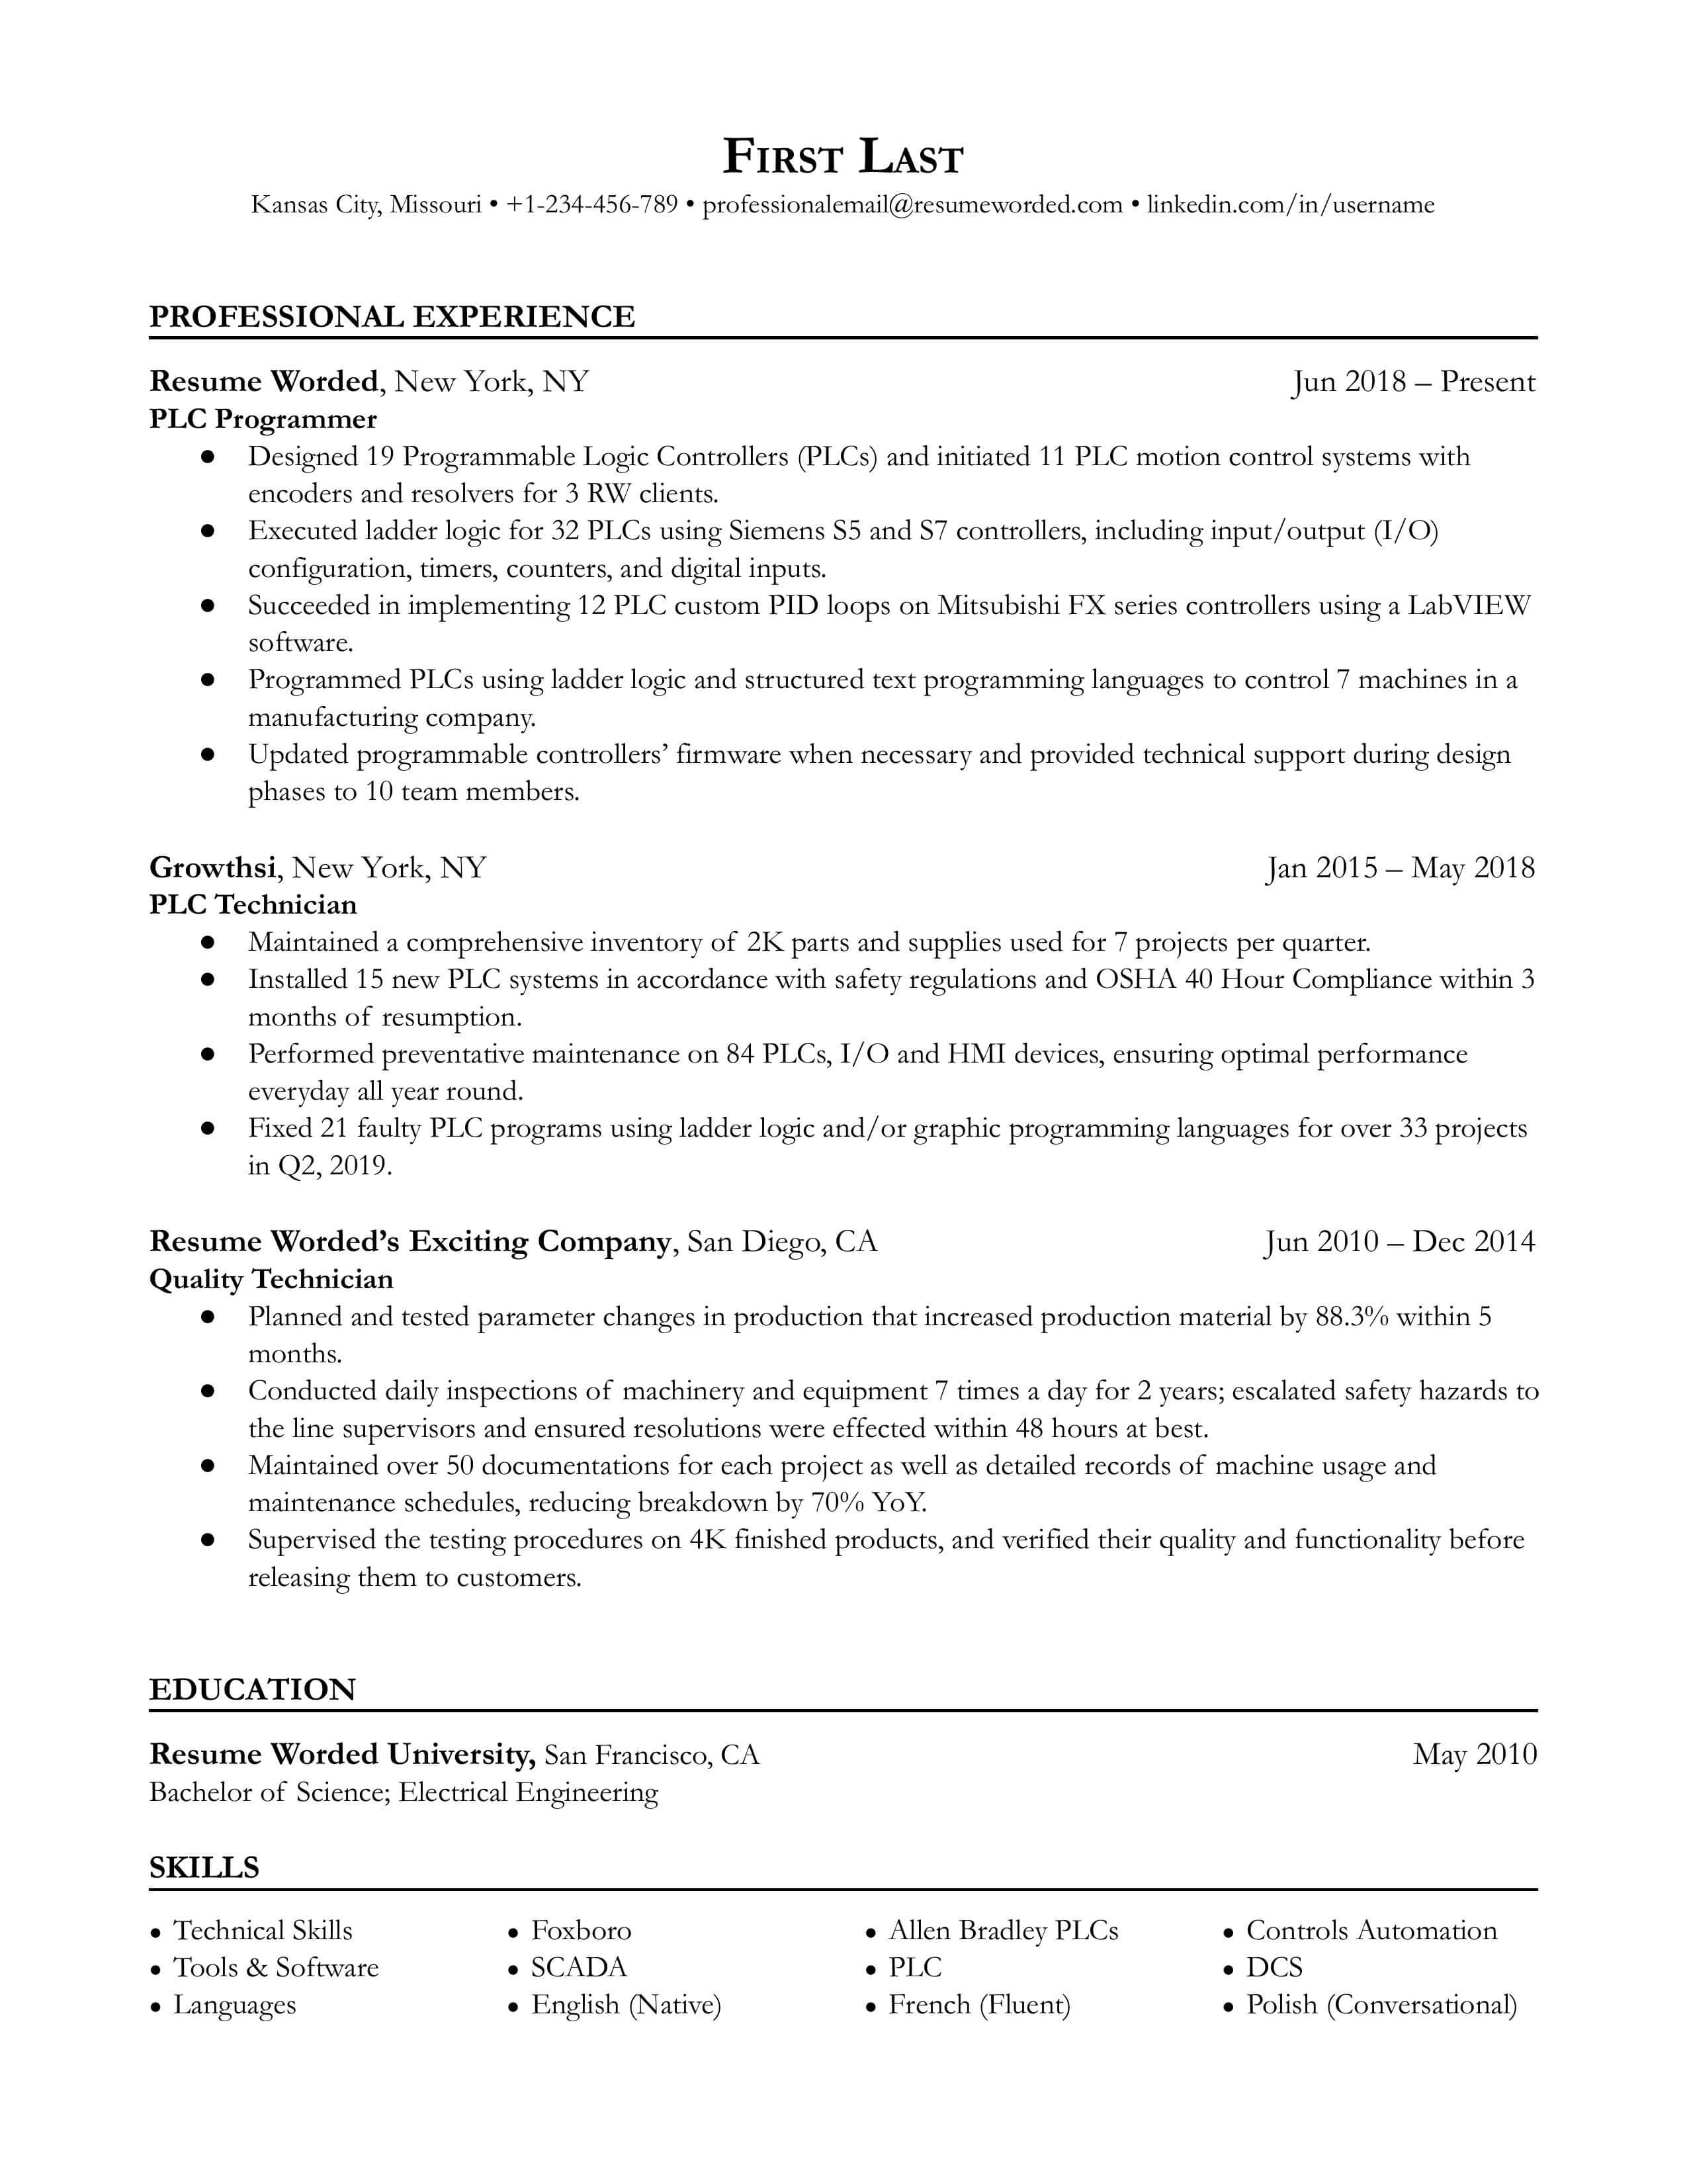 PLC Programmer's CV detailing technical skills and project experience.